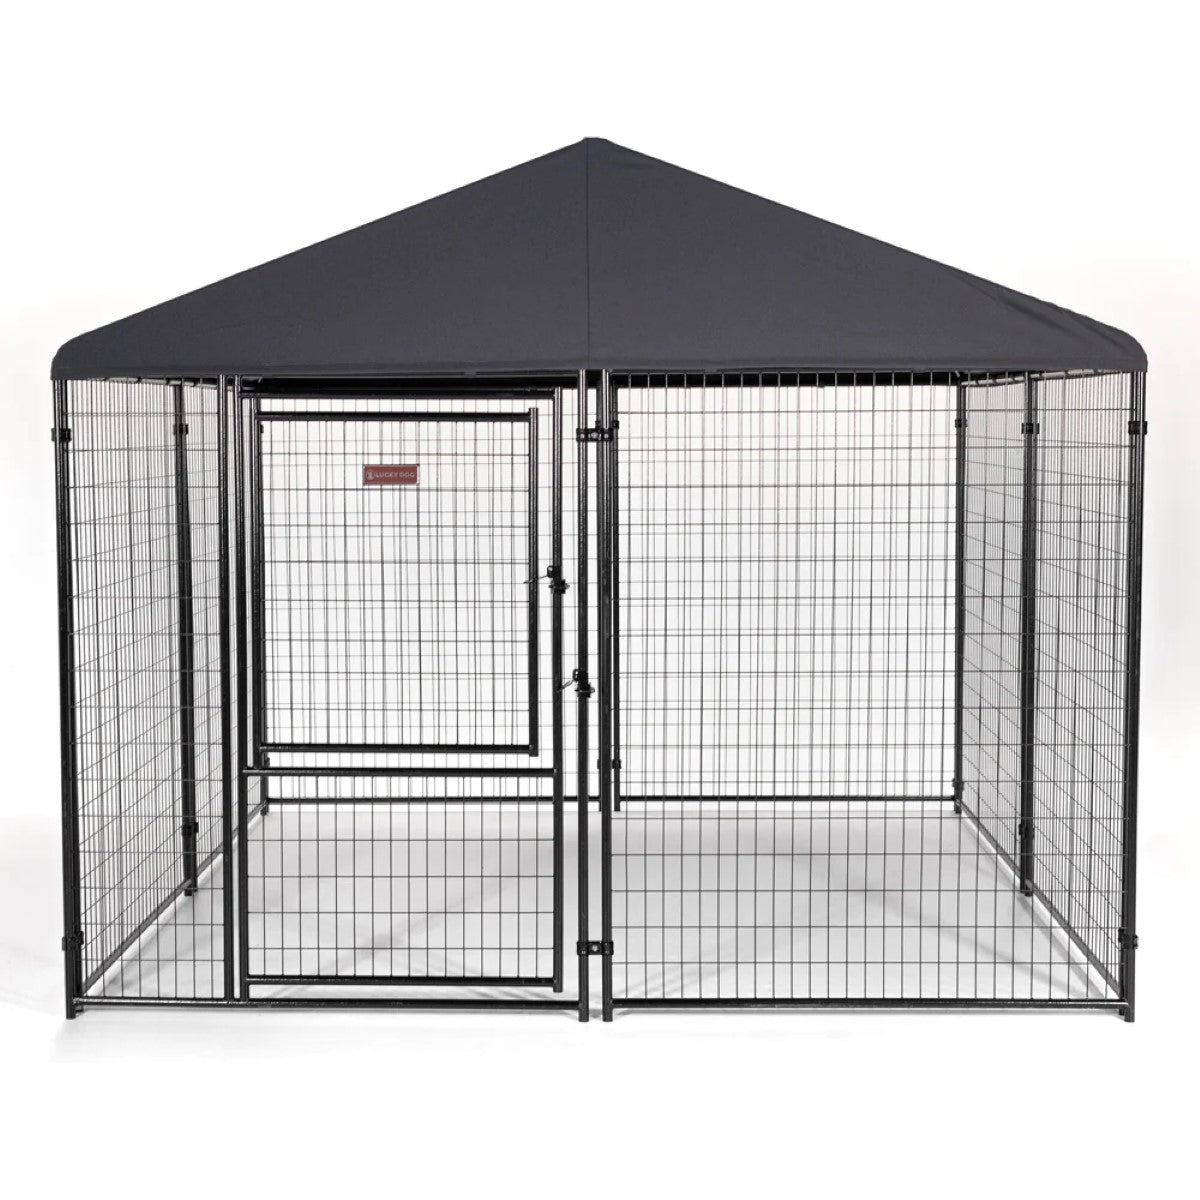 Lucky Dog STAY Series Presidential Kennel (10'x10'x6')